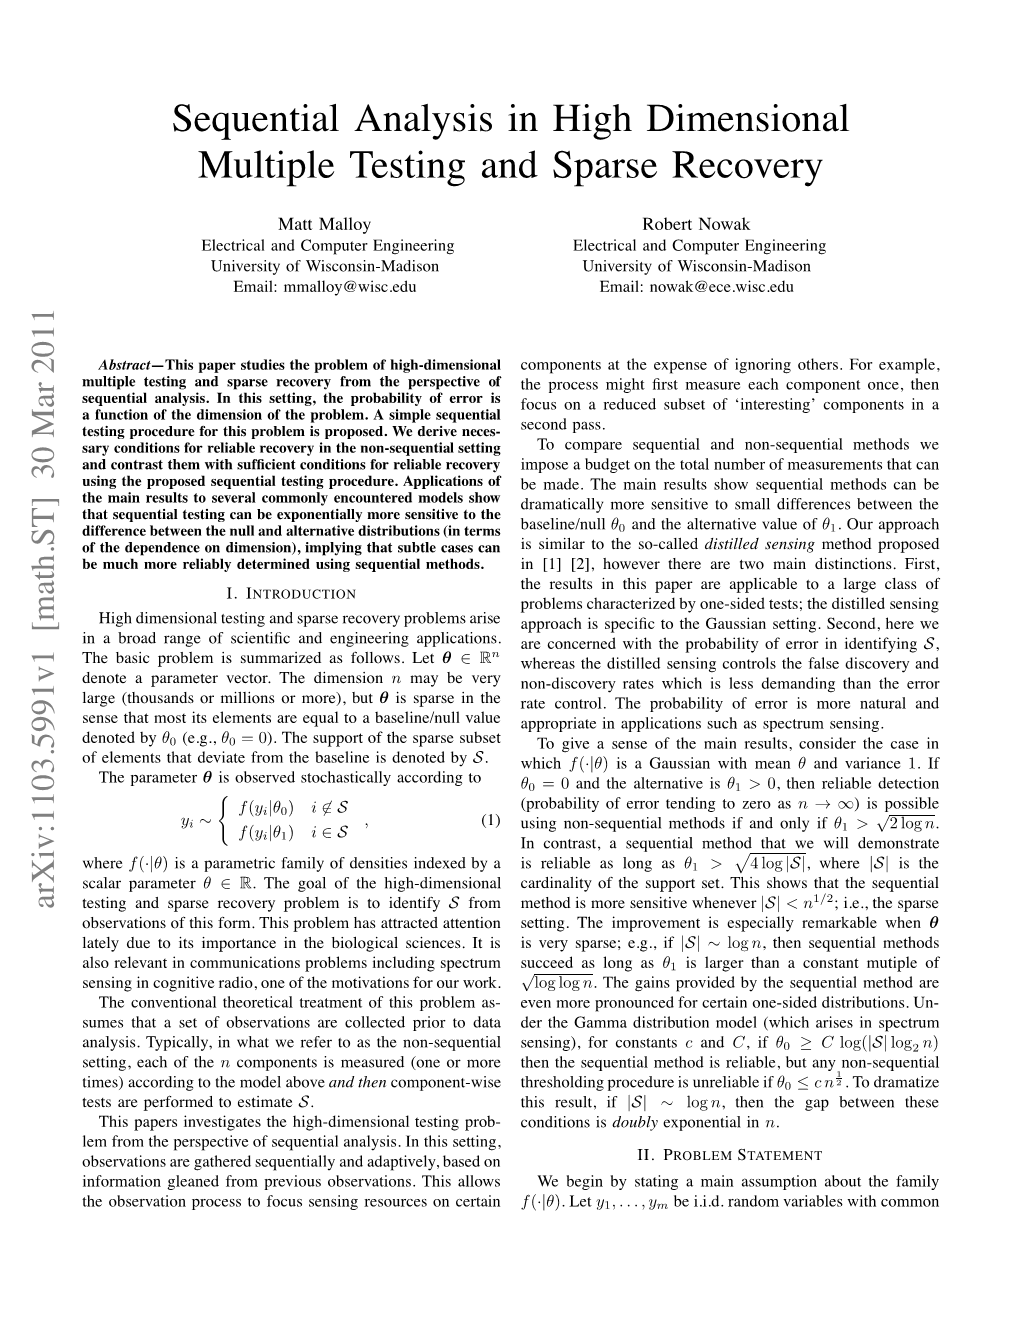 Sequential Analysis in High Dimensional Multiple Testing and Sparse Recovery